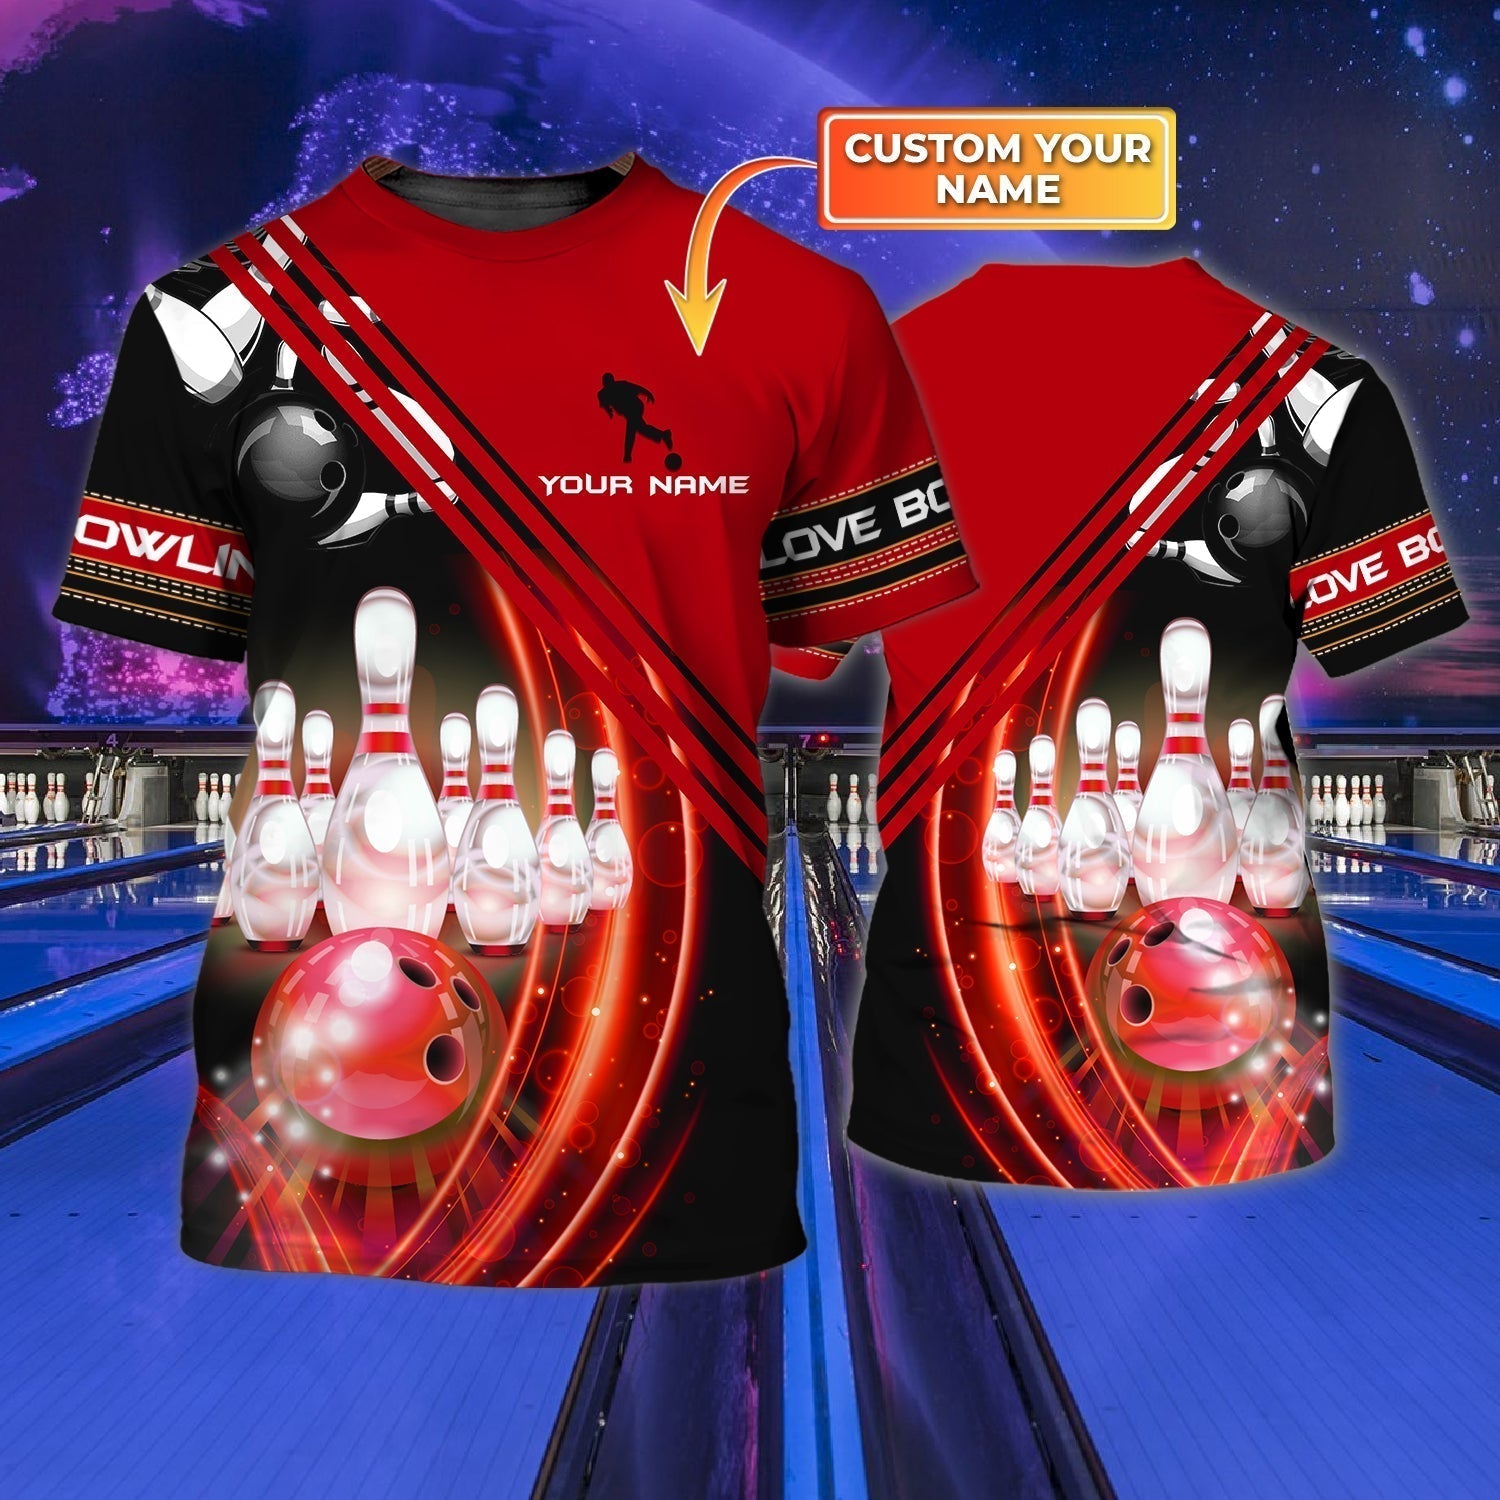 Personalized With Name Red Bowling T Shirts/ Custom 3D Bowling Shirts/ Gift For Bowling Lover